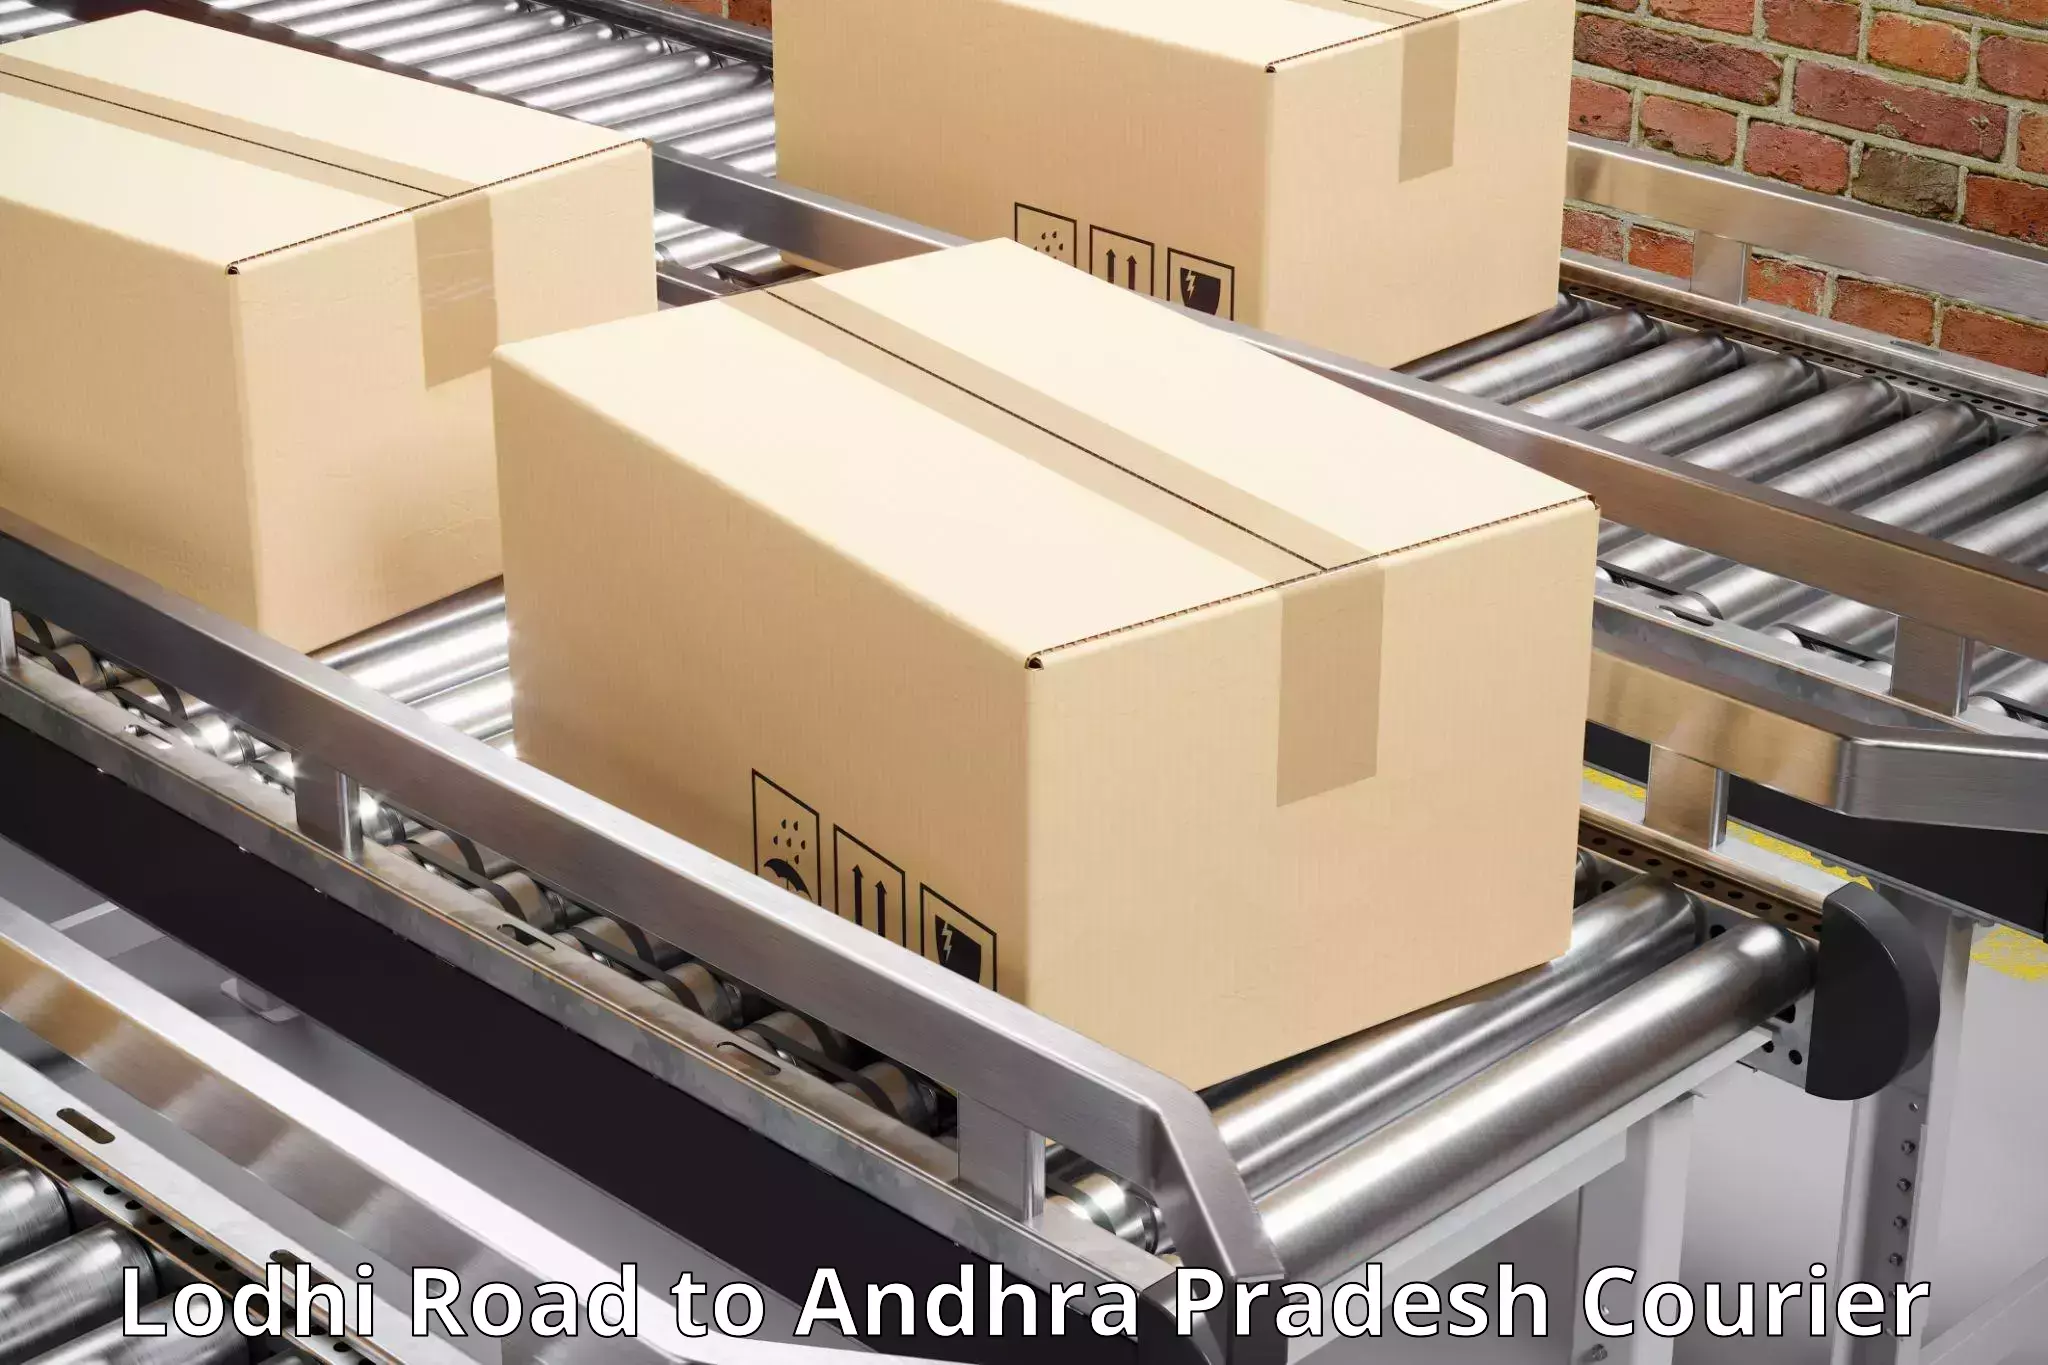 Global courier networks Lodhi Road to Proddatur